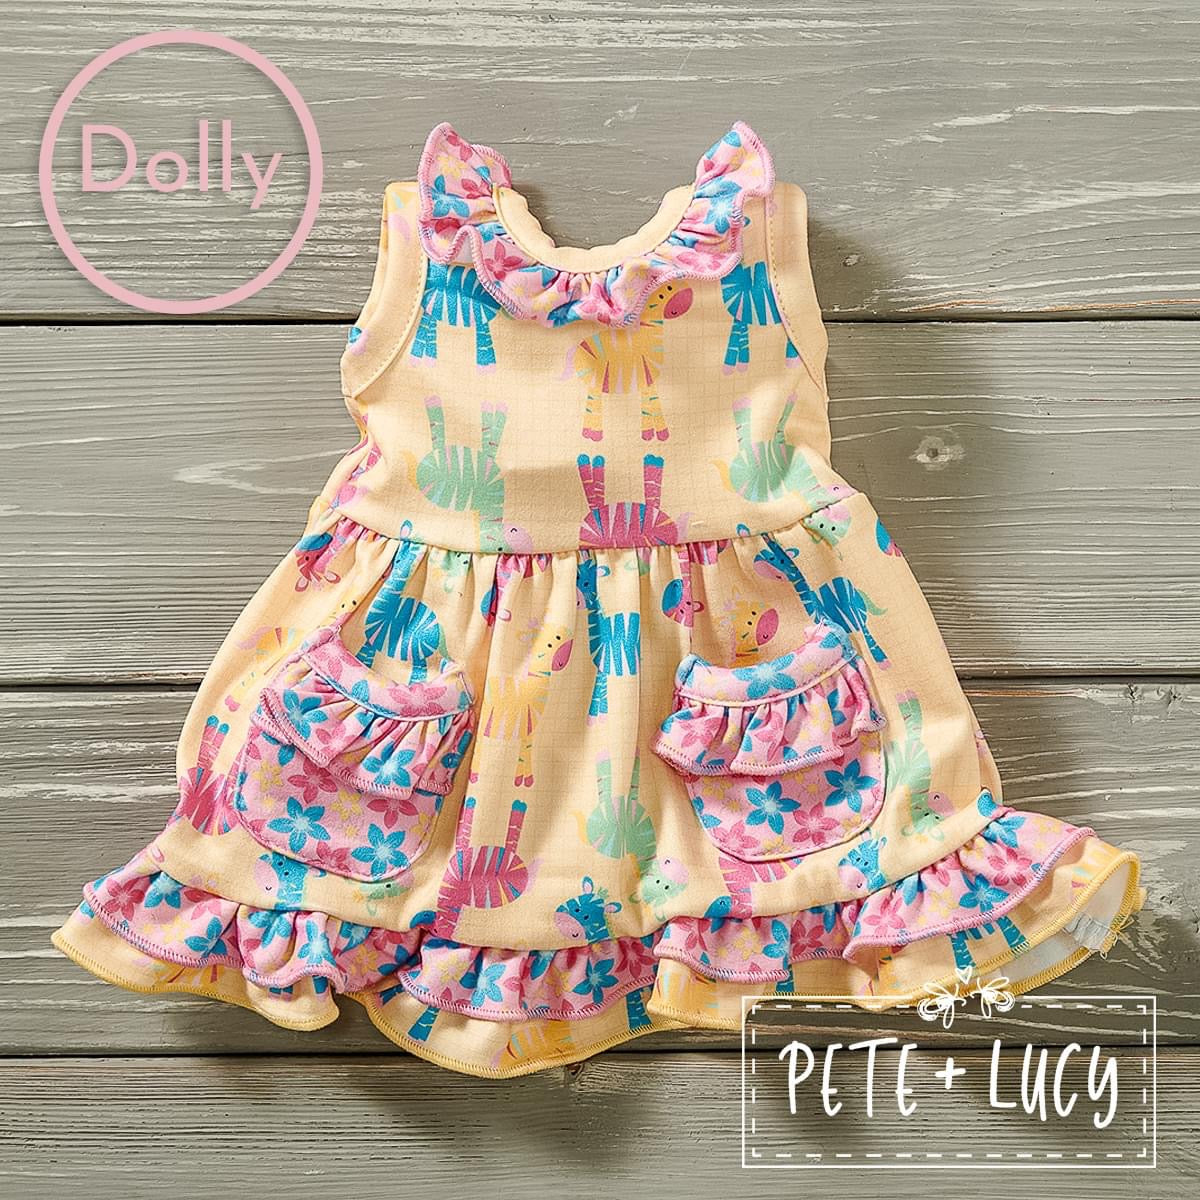 Zippin Zebra Dolly Dress by Pete and Lucy